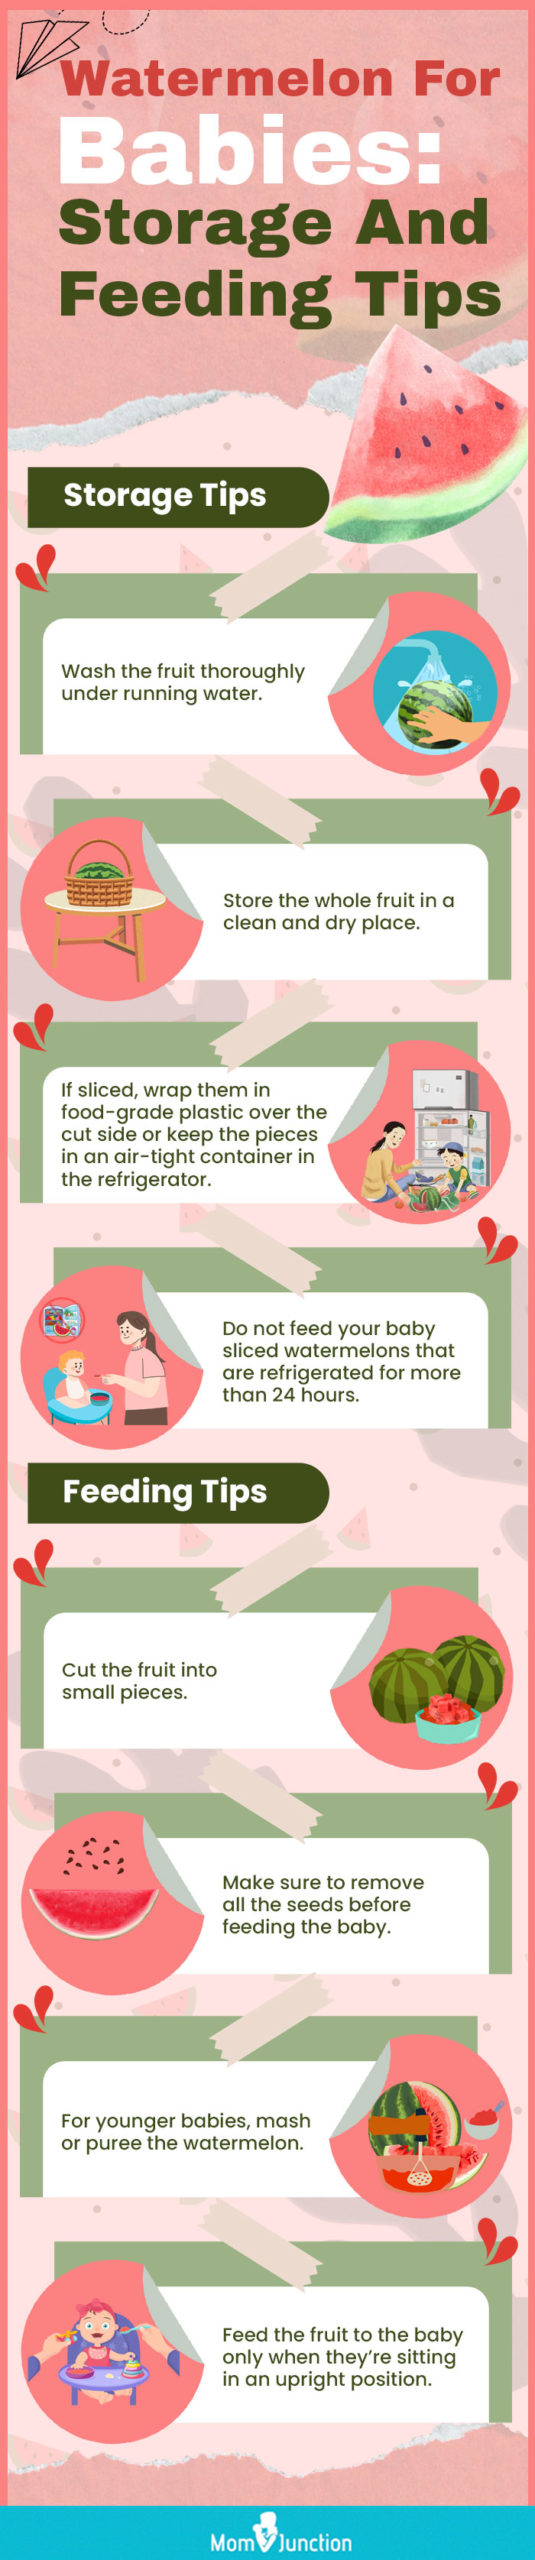 watermelon for babies storage and feeding tips (infographic)